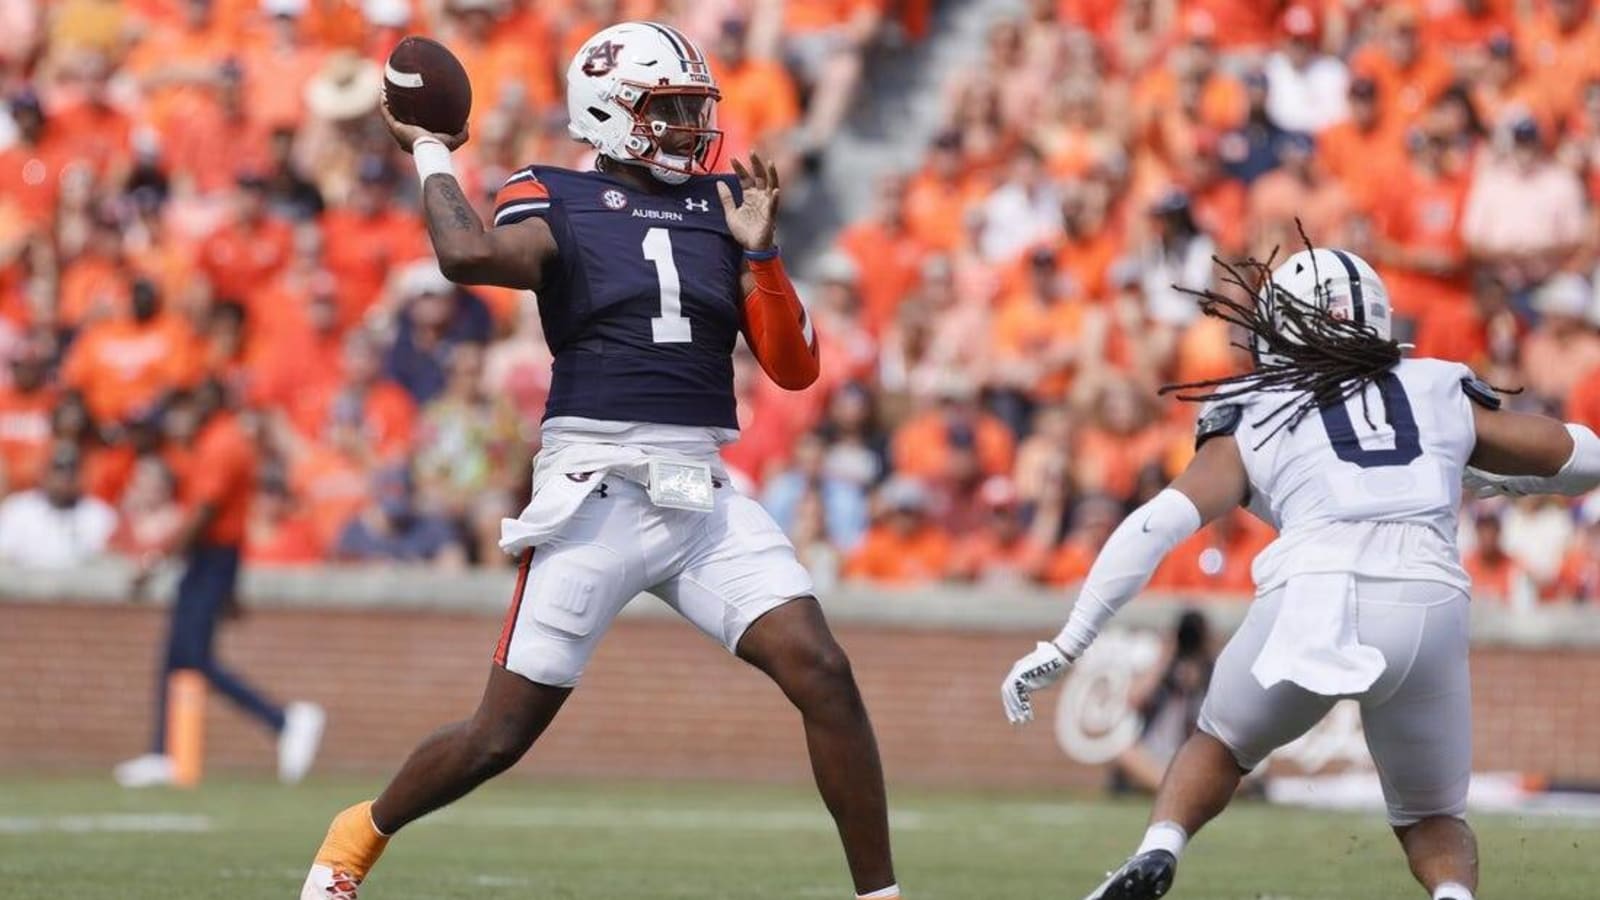 Reports: Auburn QB T.J. Finley out for LSU game